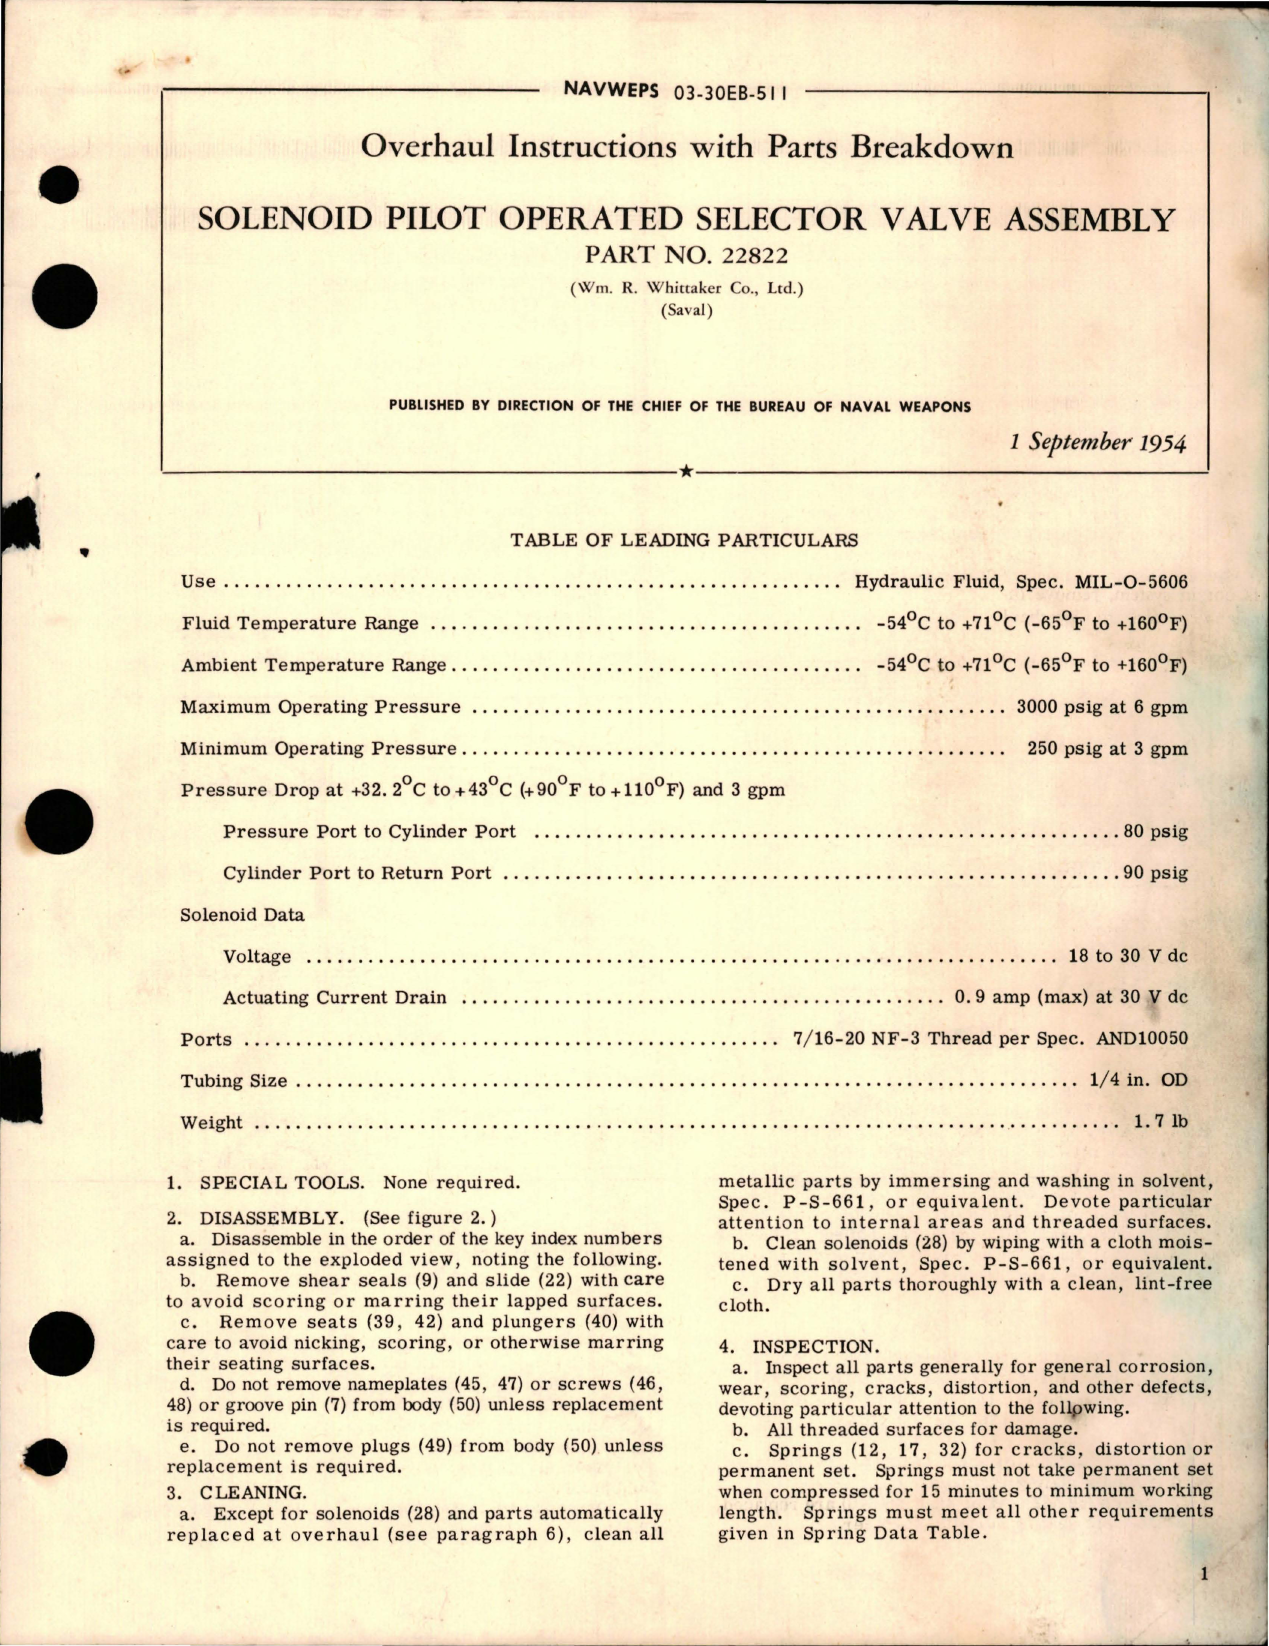 Sample page 1 from AirCorps Library document: Overhaul Instructions with Parts Breakdown for Solenoid Pilot Operated Selector Valve Assembly - Part 22822